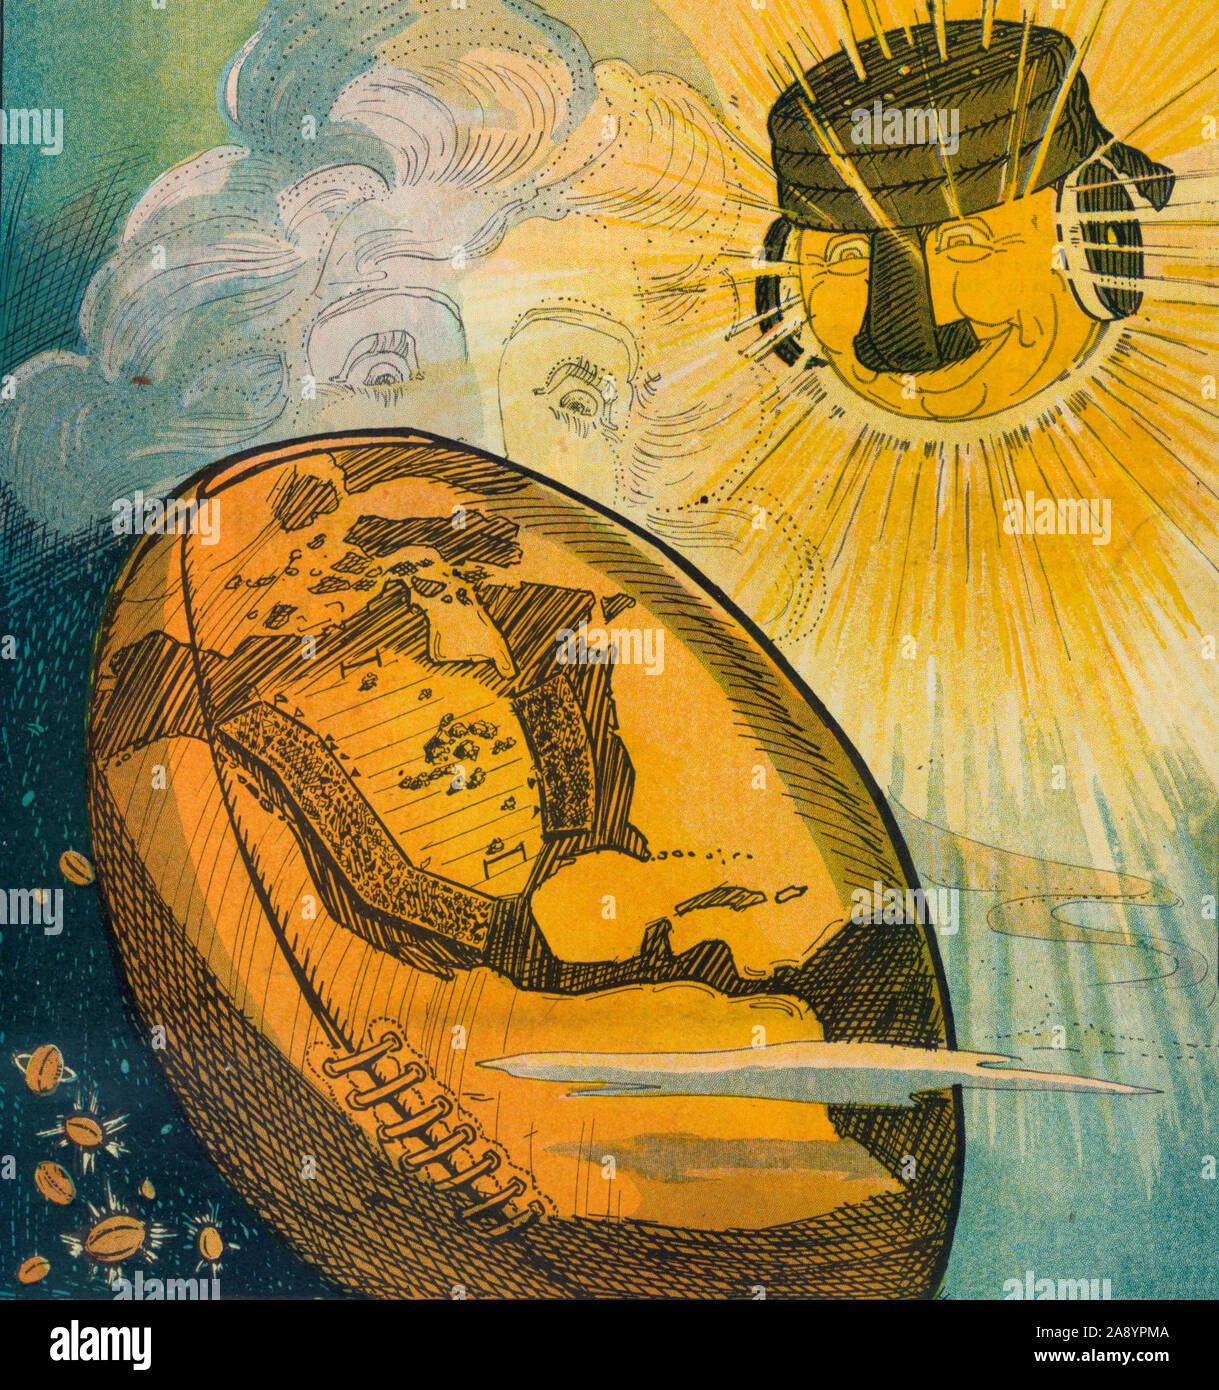 The college world - Illustration shows the sun wearing a football helmet, beaming rays onto a football shaped planet that shows a stadium with fans in the grandstands and a football game in progress; also shows, in the background, an outline of a young woman's head. Political Cartoon, 1906 Stock Photo